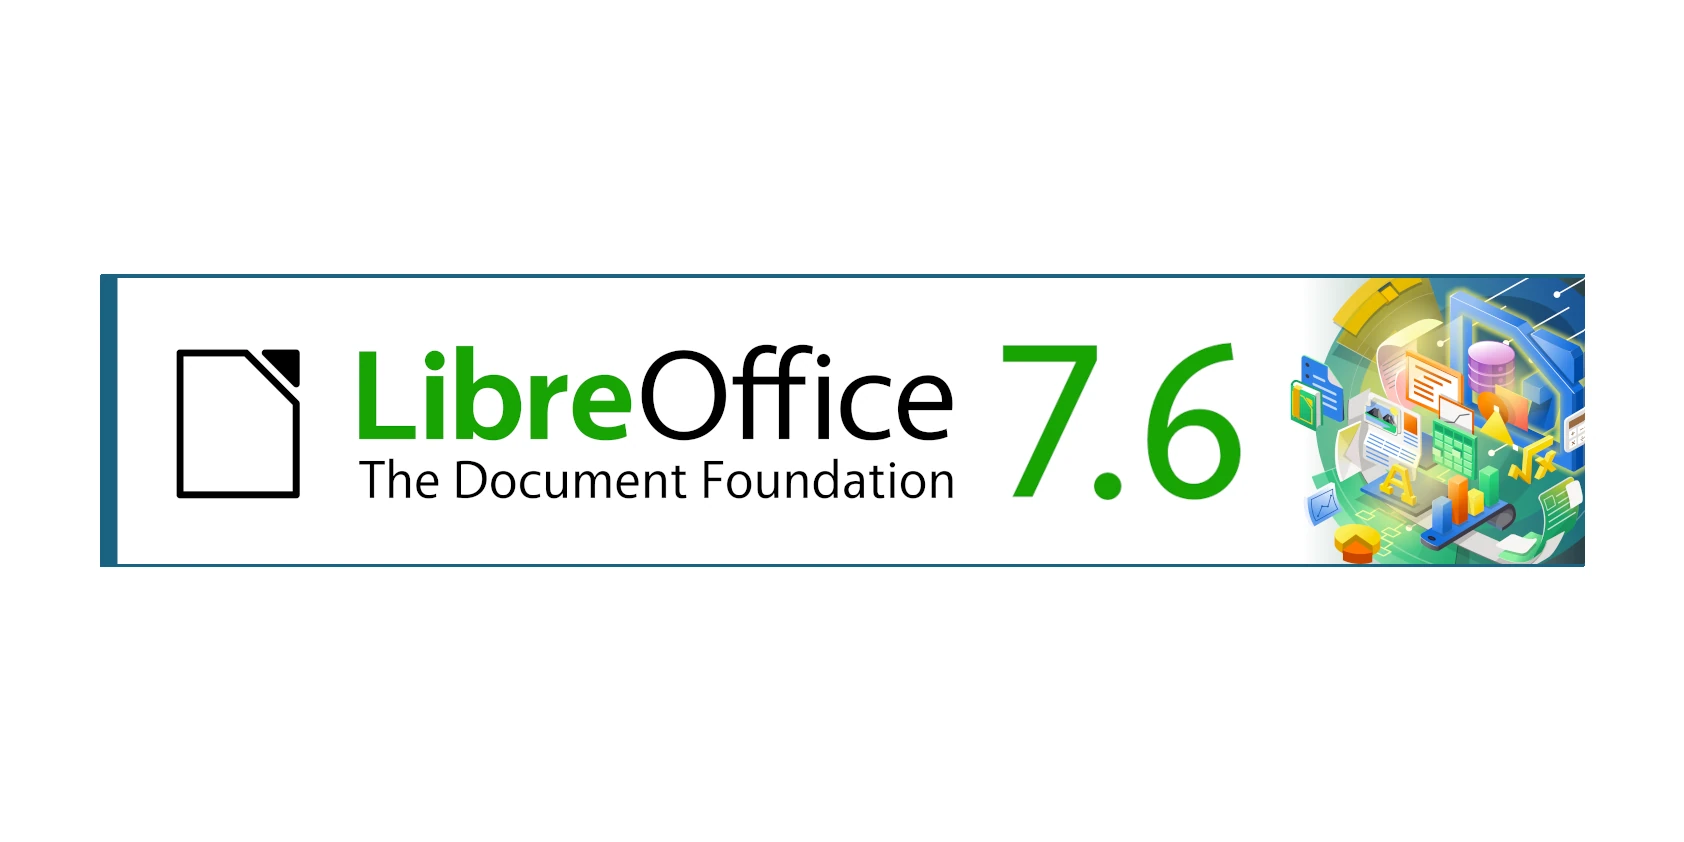 LibreOffice 7.6.3 Office Suite Is Out Now with More Than 110 Bug Fixes